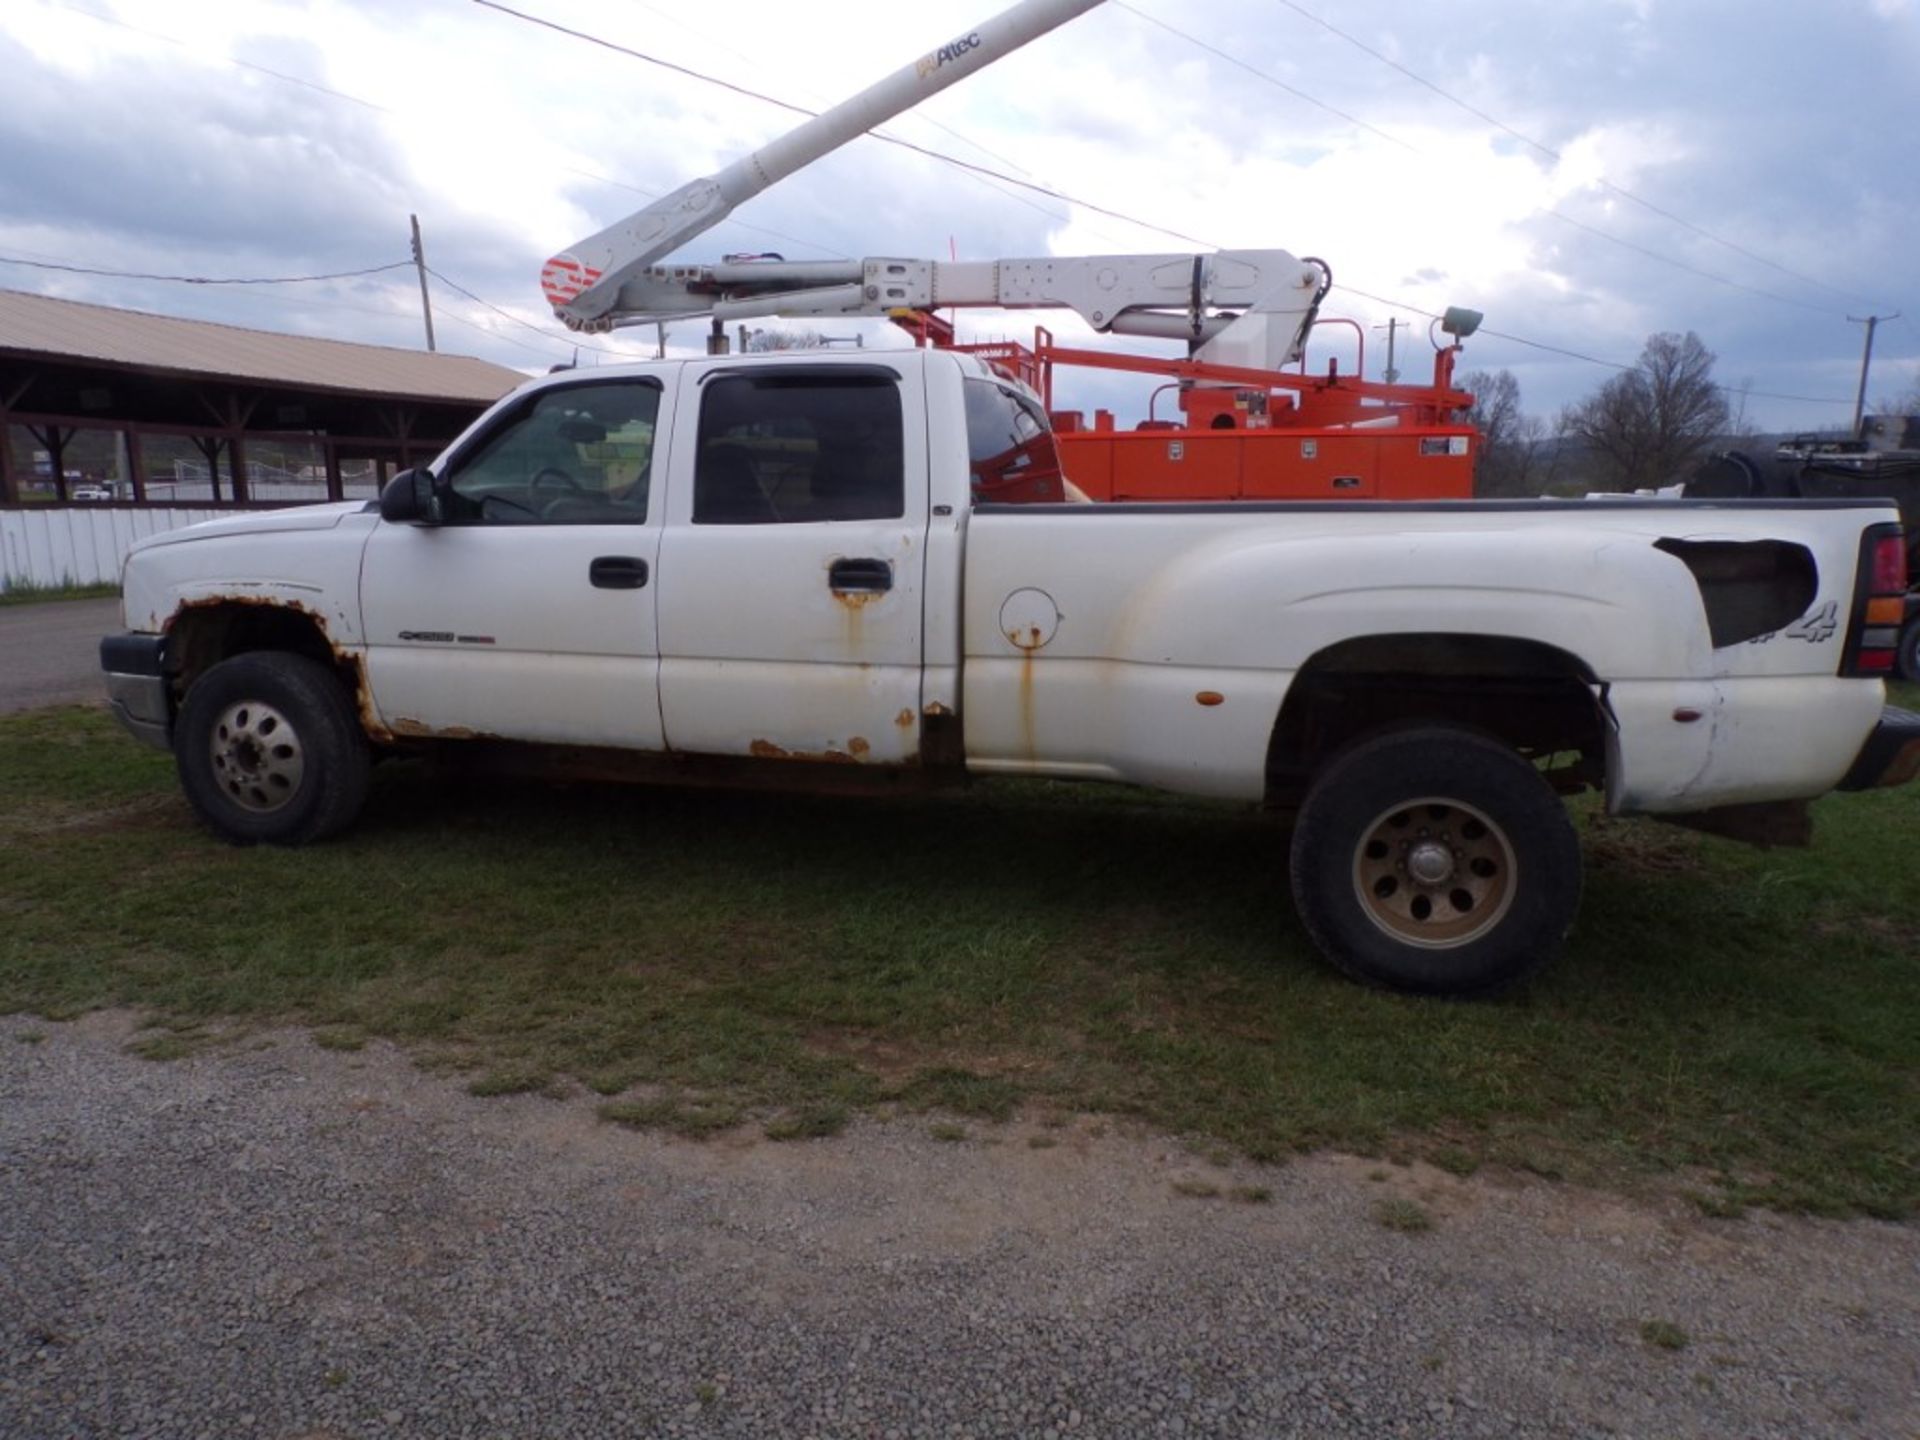 2005 Chevrolet 3500 Dually, 4WD, Duramax Dsl Eng, Vin# 1GCJK332X5F970276 - HAVE TITLE (463)